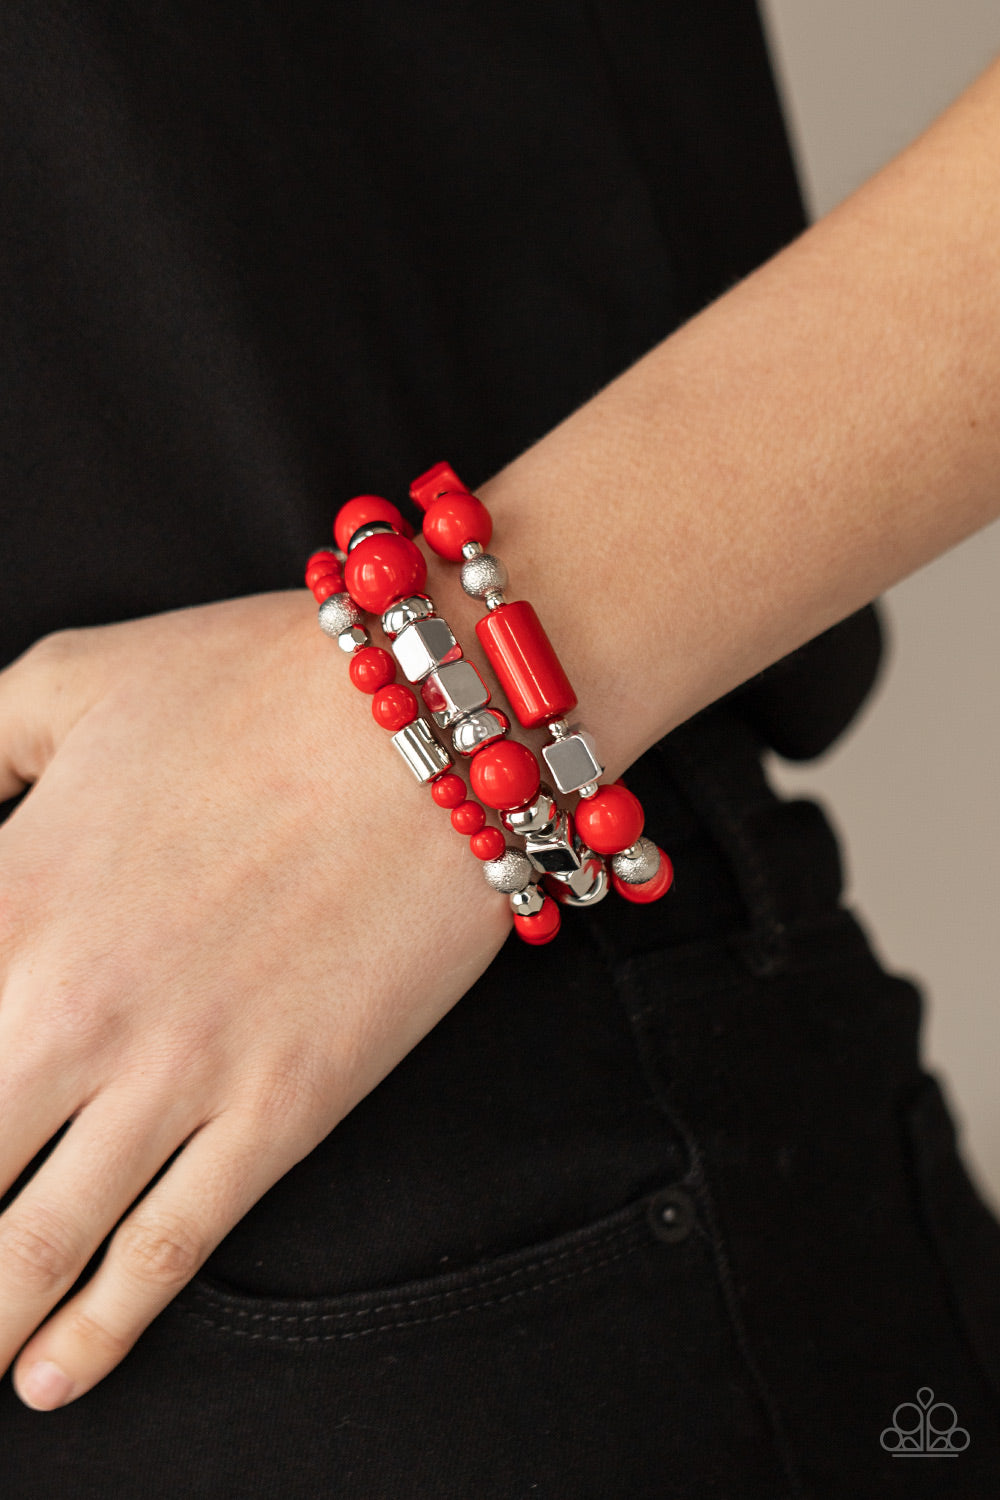 &lt;p&gt;Featuring round, cube, and faceted shapes, a colorful collection of Red Maple and silver beads are threaded along stretchy bands around the wrist, creating vivacious layers.&lt;/p&gt;  

&lt;p&gt; &lt;i&gt;Sold as one set of three bracelets.&lt;/i&gt;  &lt;/p&gt;


